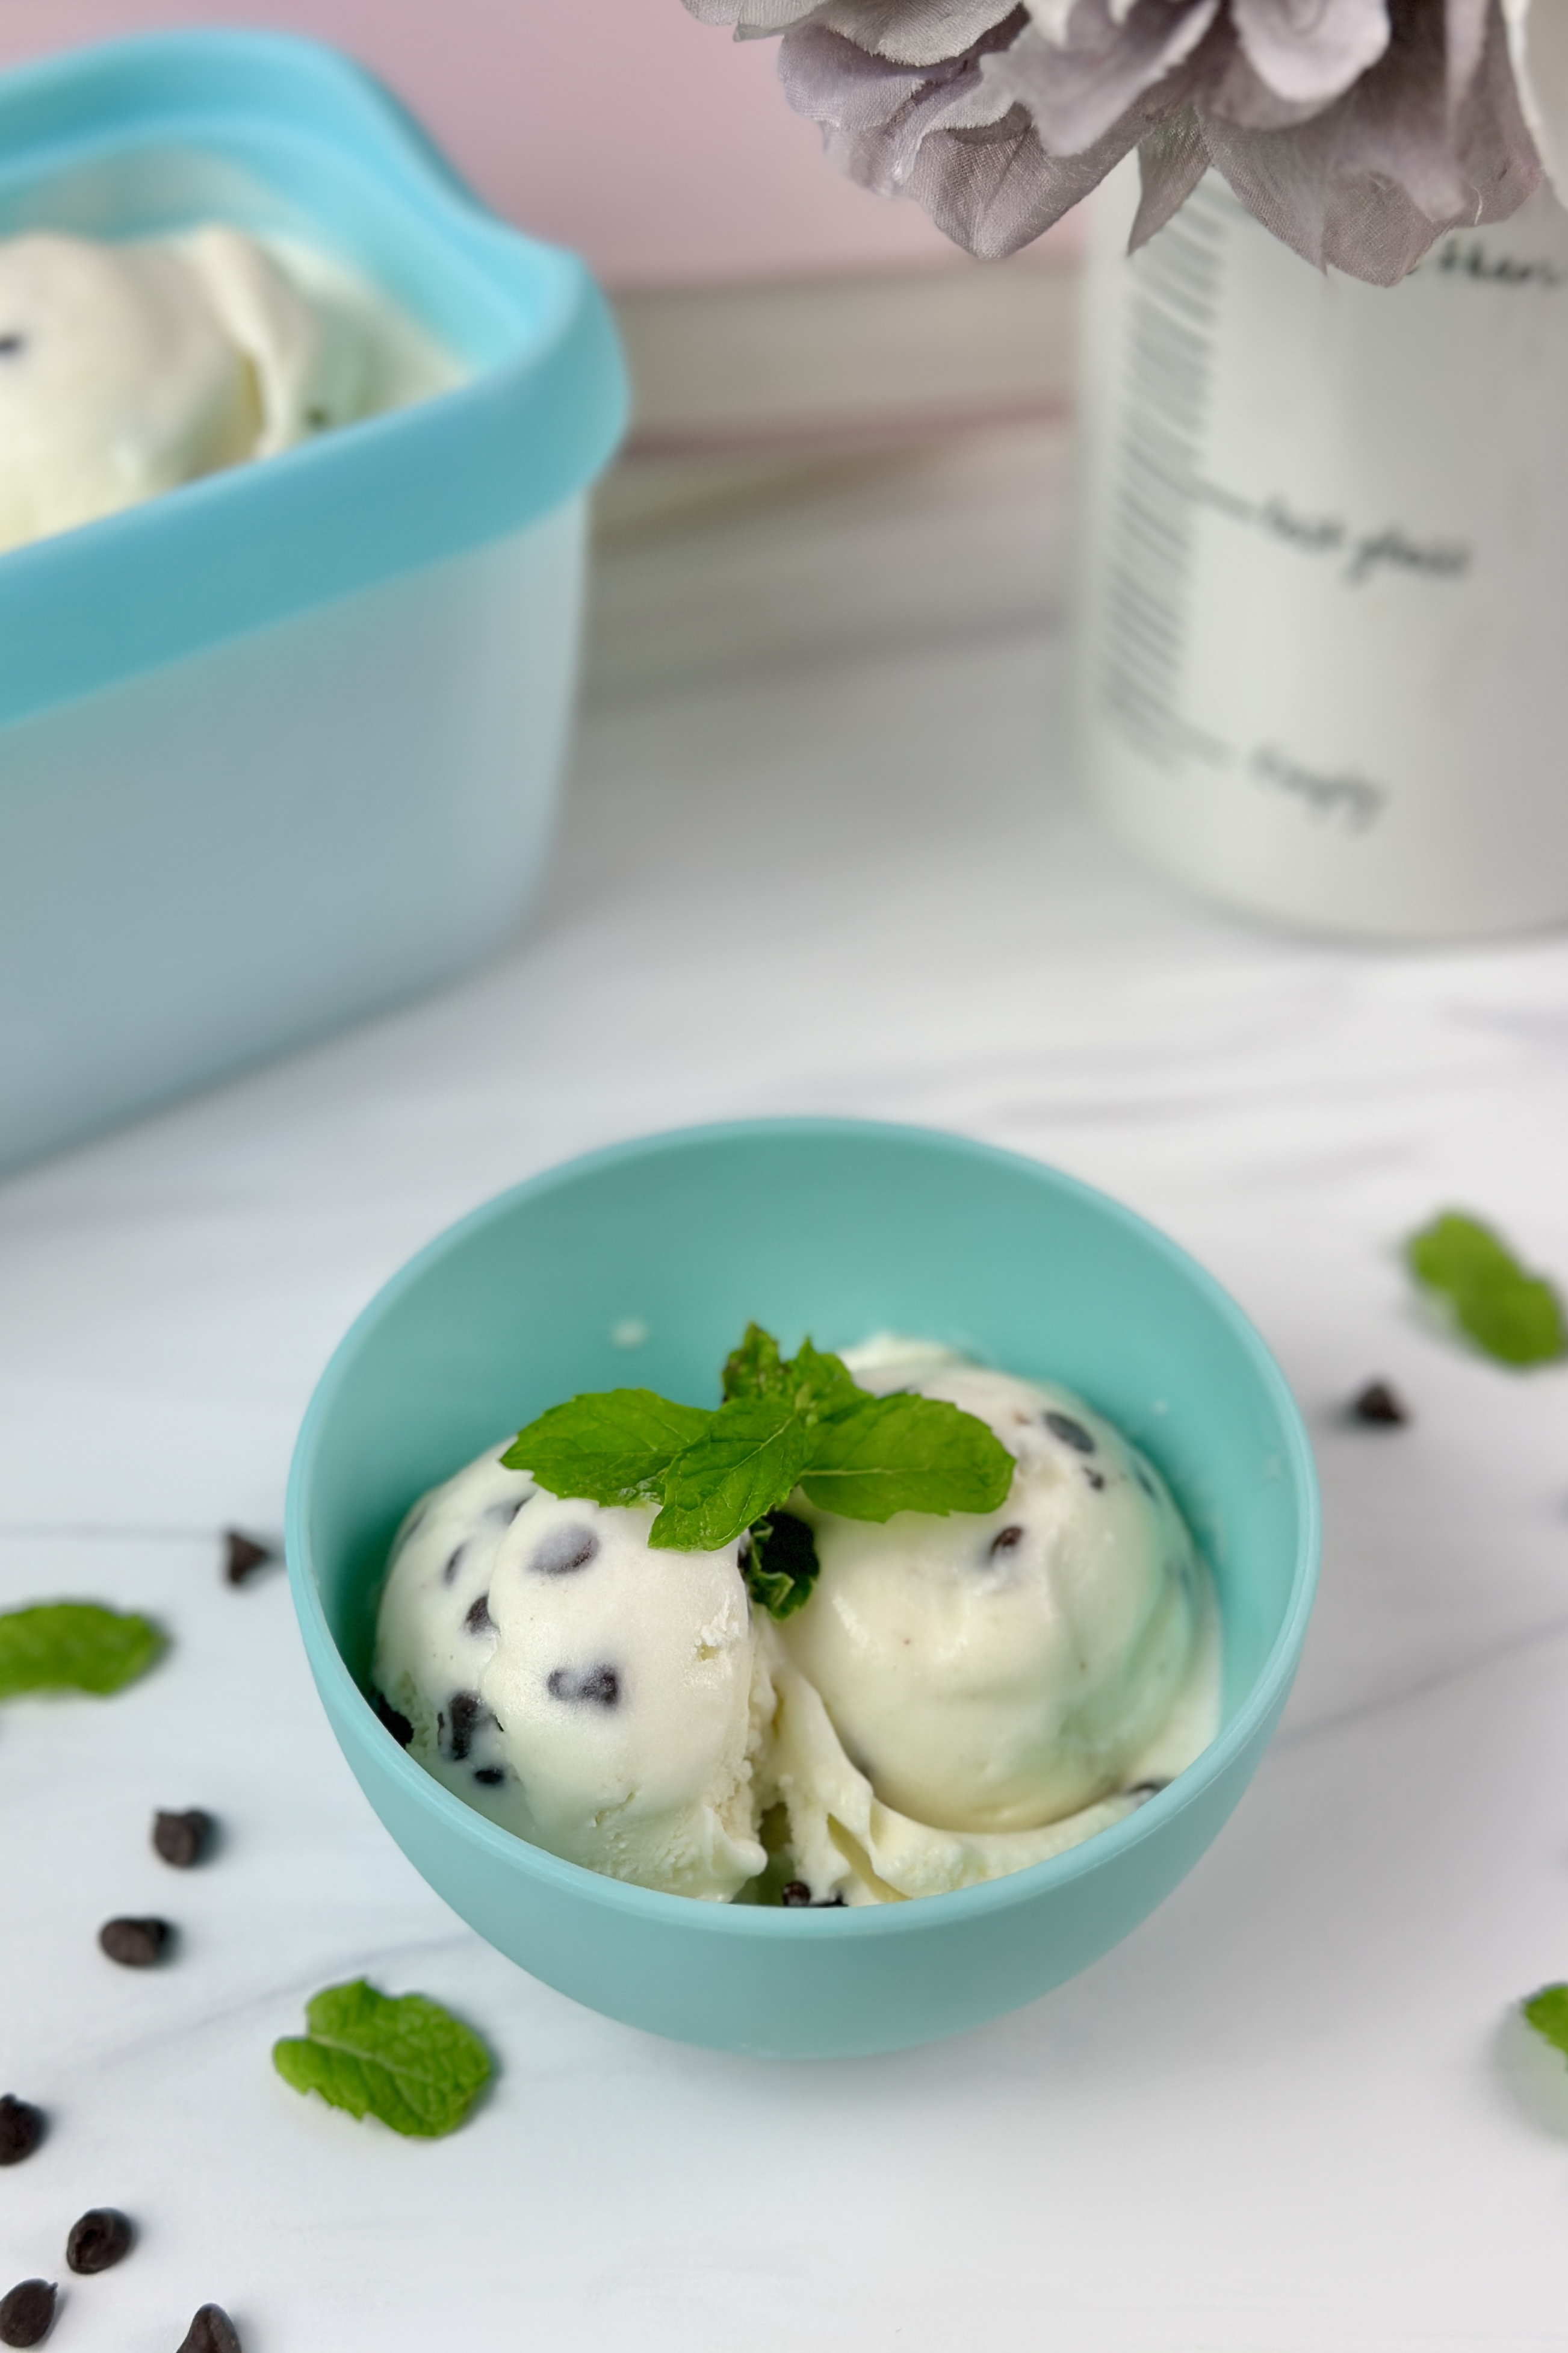 This delicious Mint Chocolate Chip Ice Cream is easy to make and tastes like your childhood favorite combination of mint and chocolate.